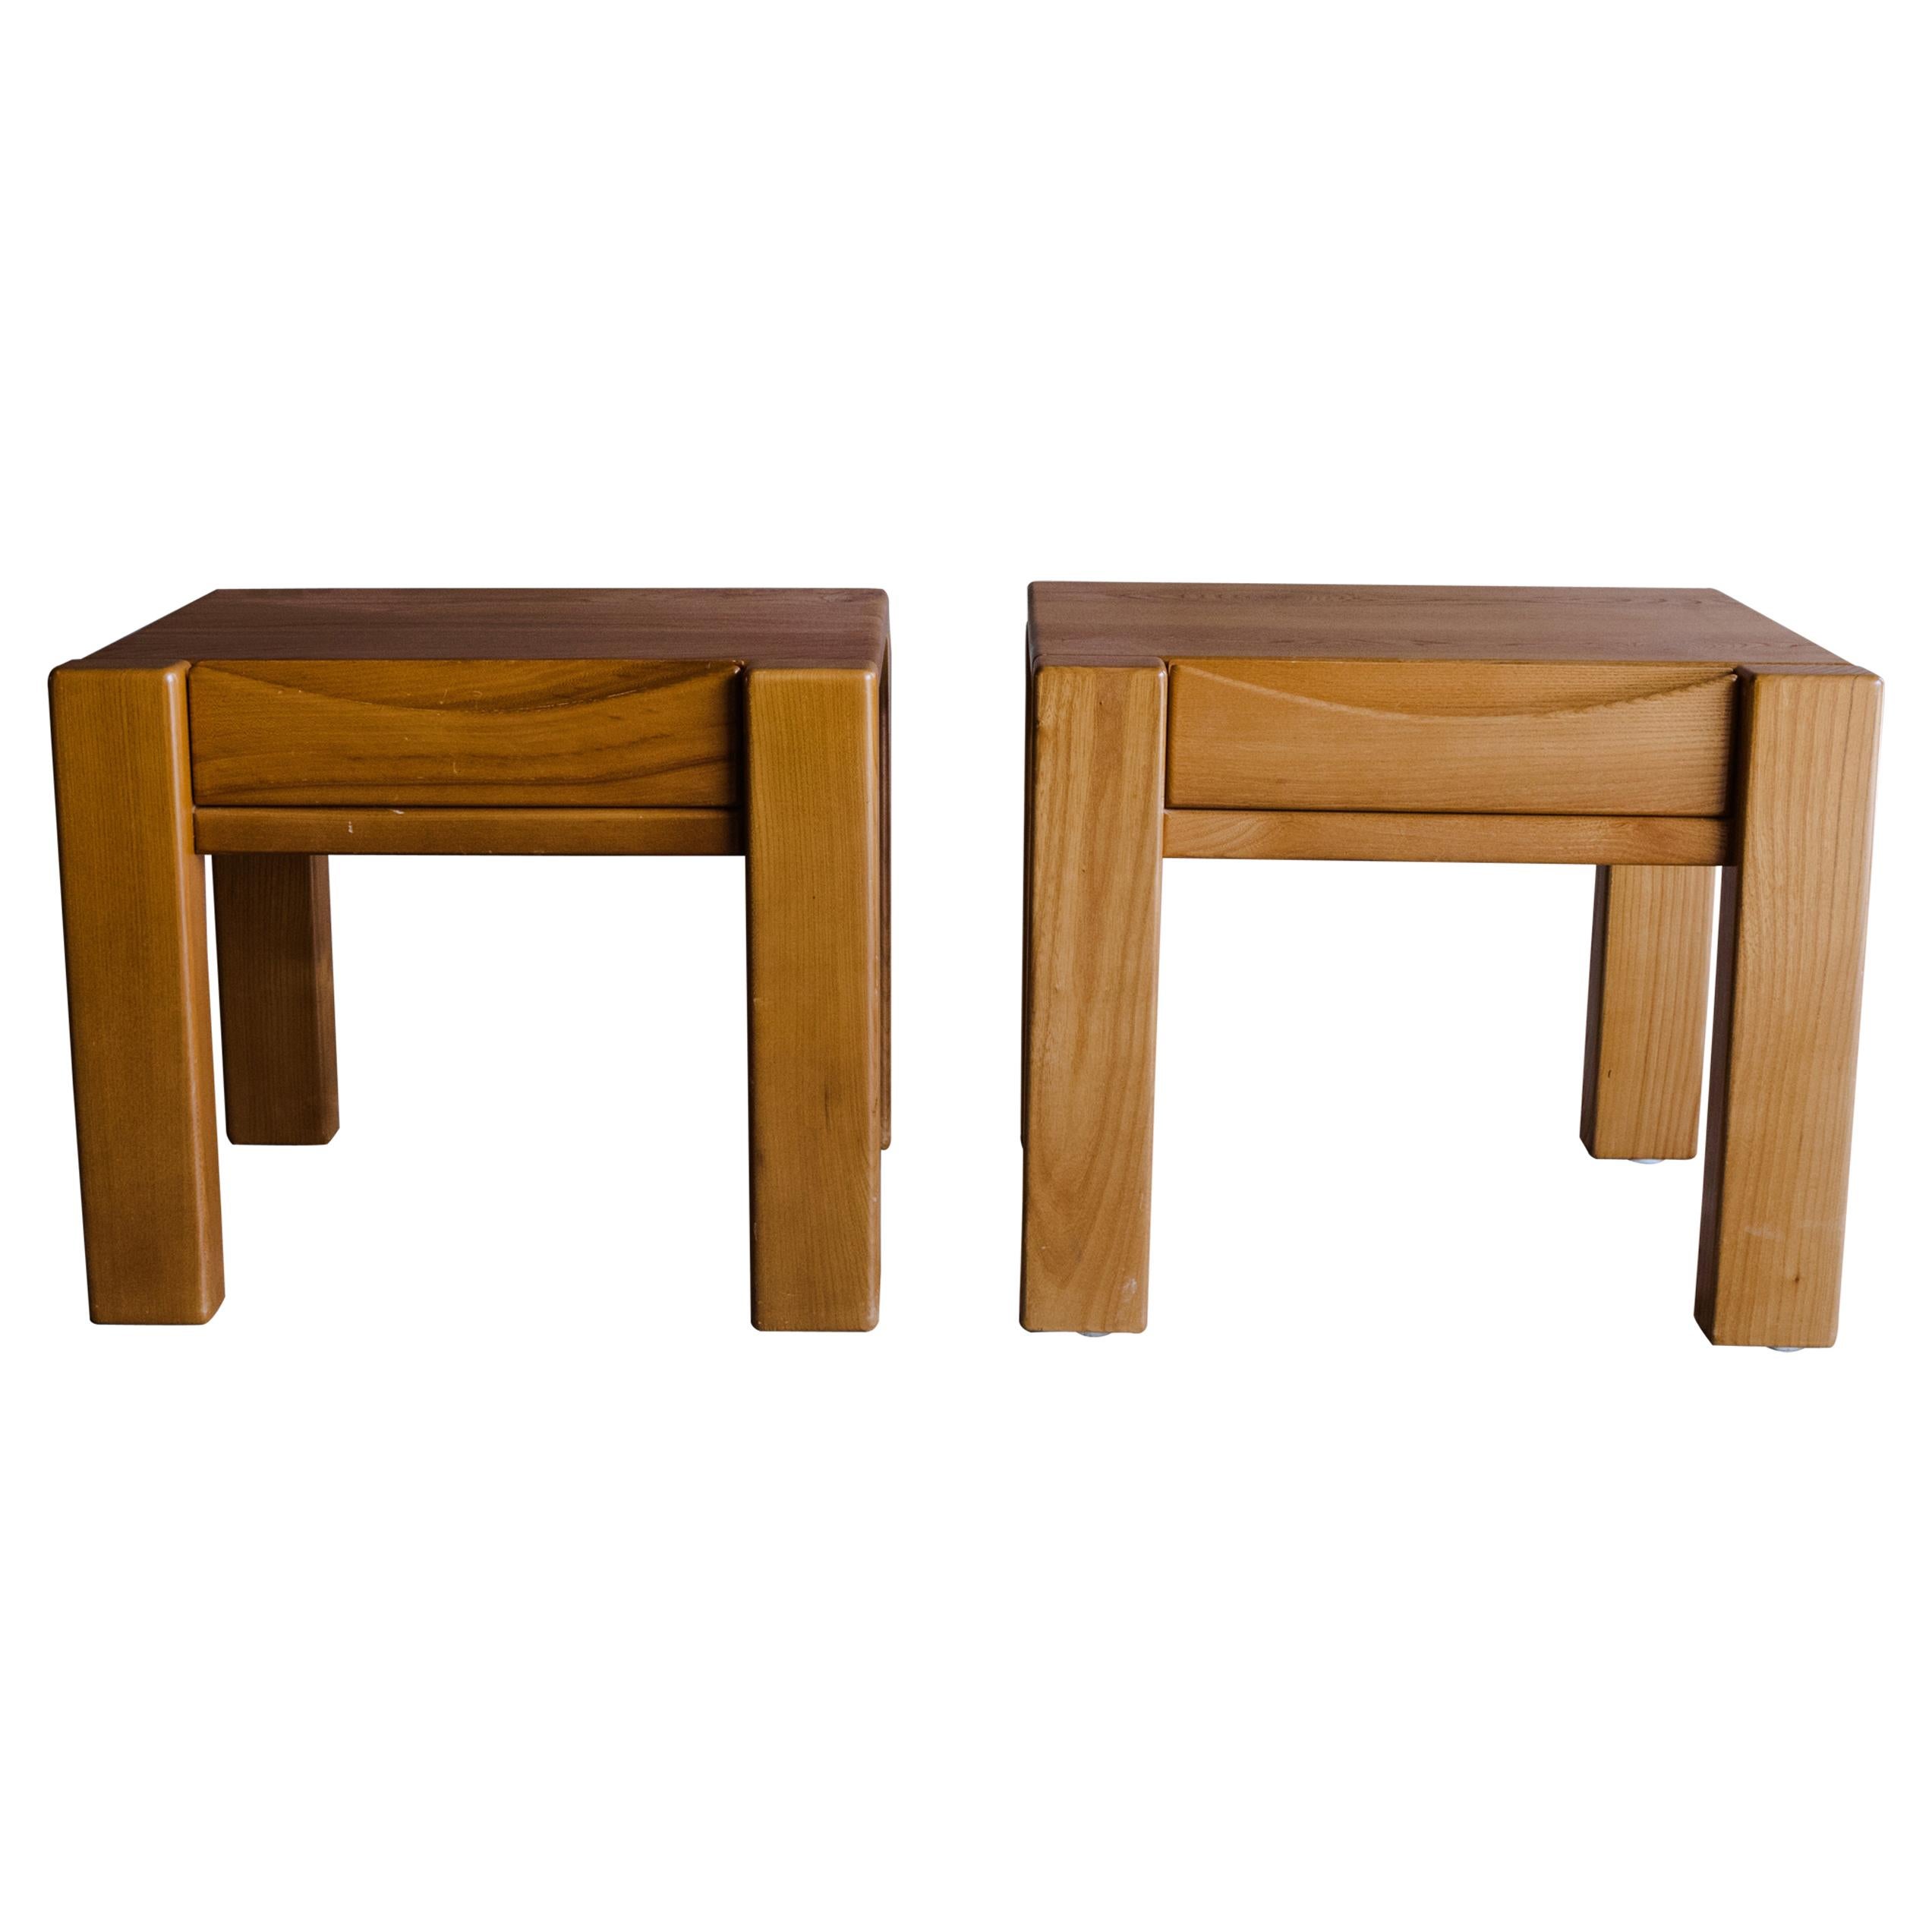 Vintage Pair of Elm Bedside Tables from France, Circa 1960